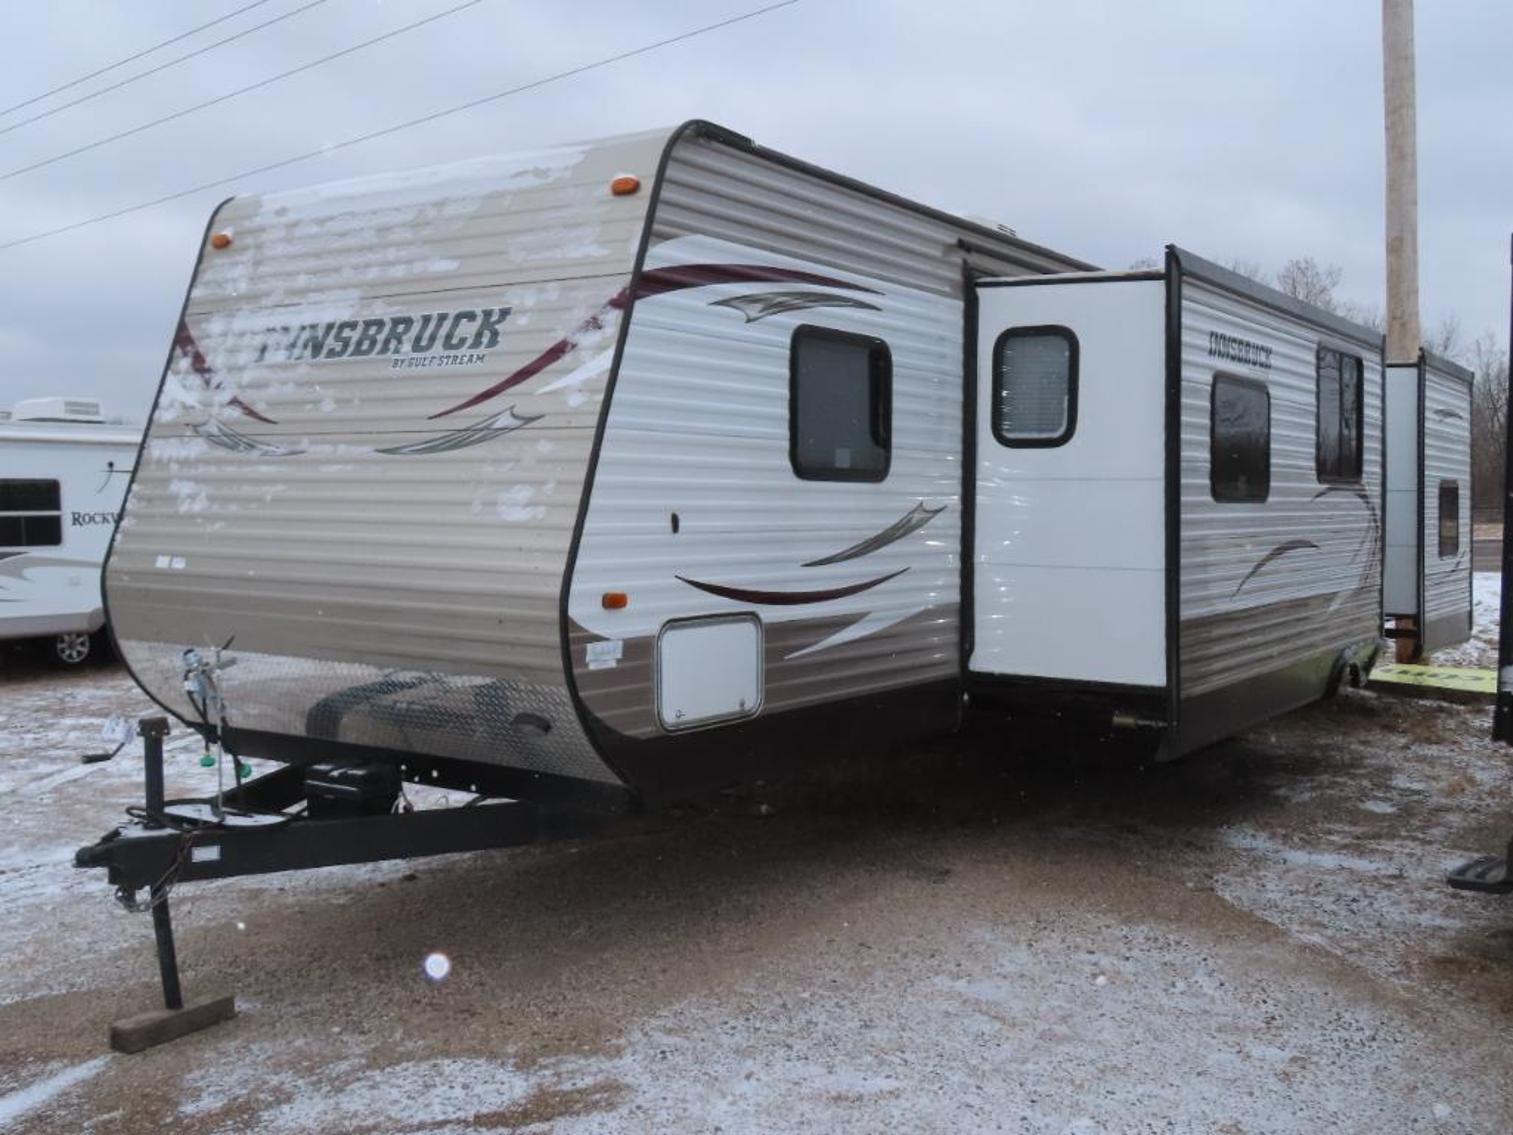 30 Units: (8) 5th Wheels and (22) Travel Trailers